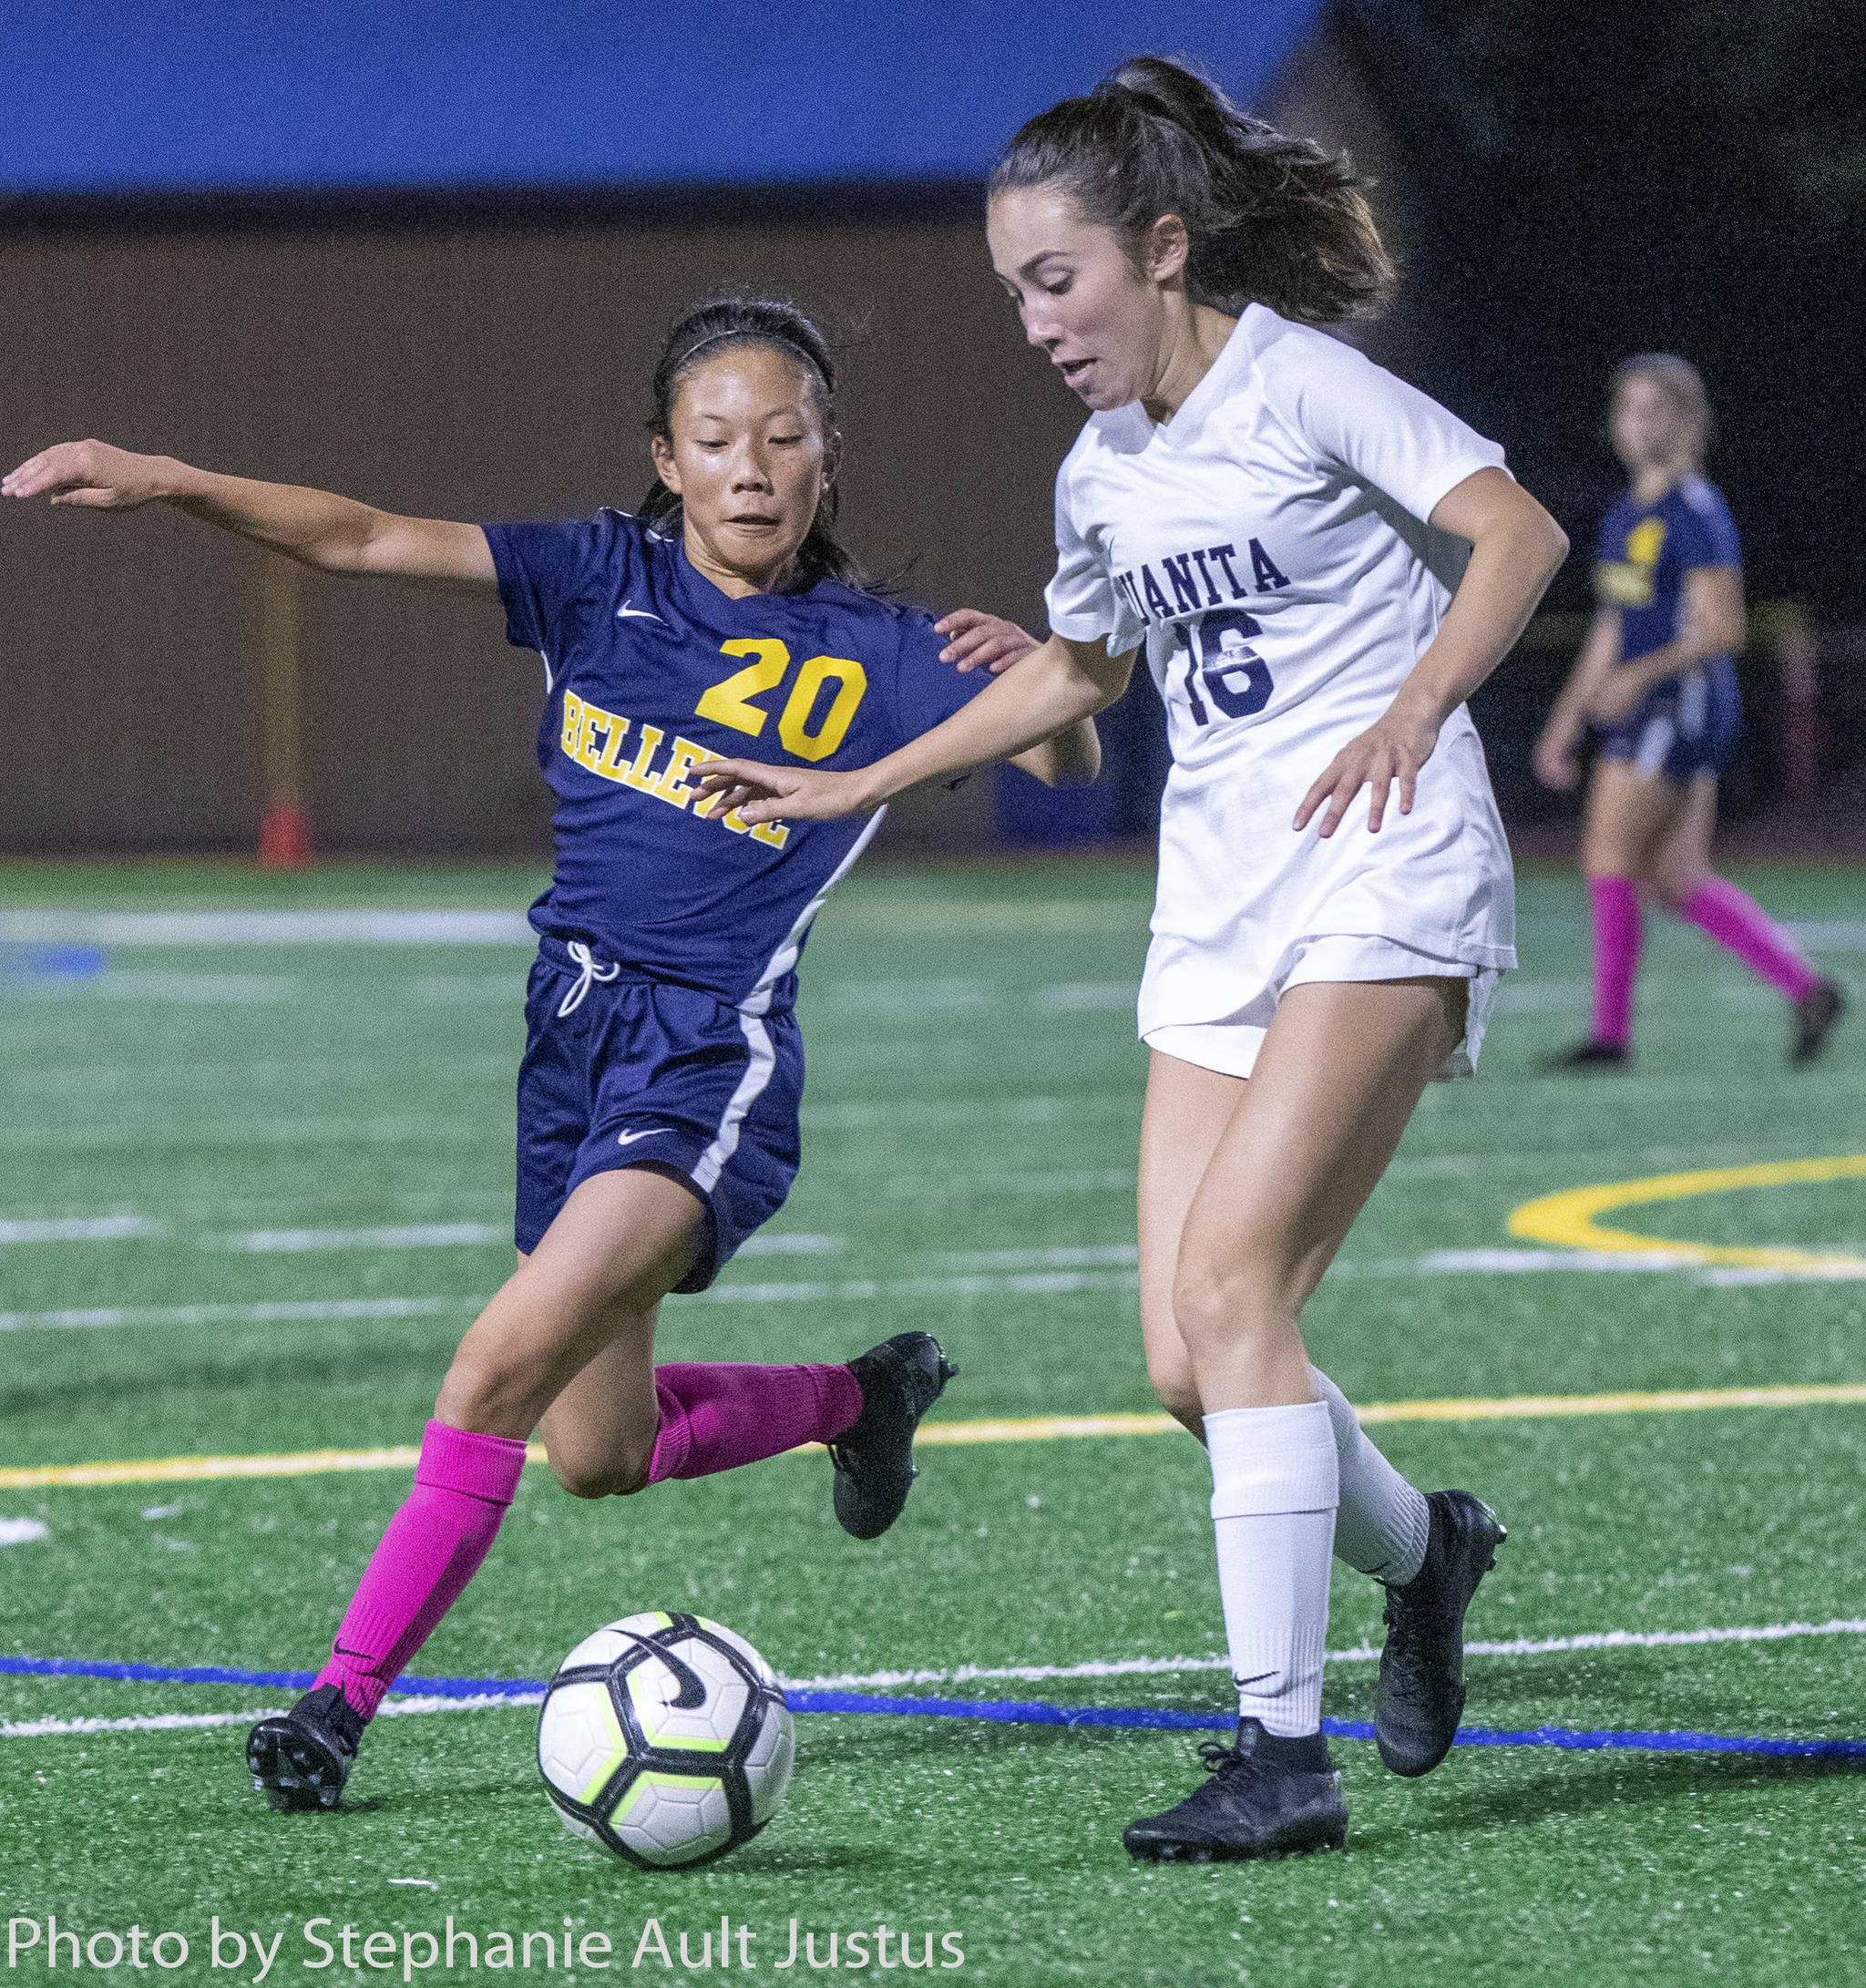 Bellevue midfielder Hinana Takashima and Juanita defender Noelle Hall both go for the ball during the Wolverines’ 1-0 victory on Oct. 1. Photo courtesy of Stephanie Ault Justus